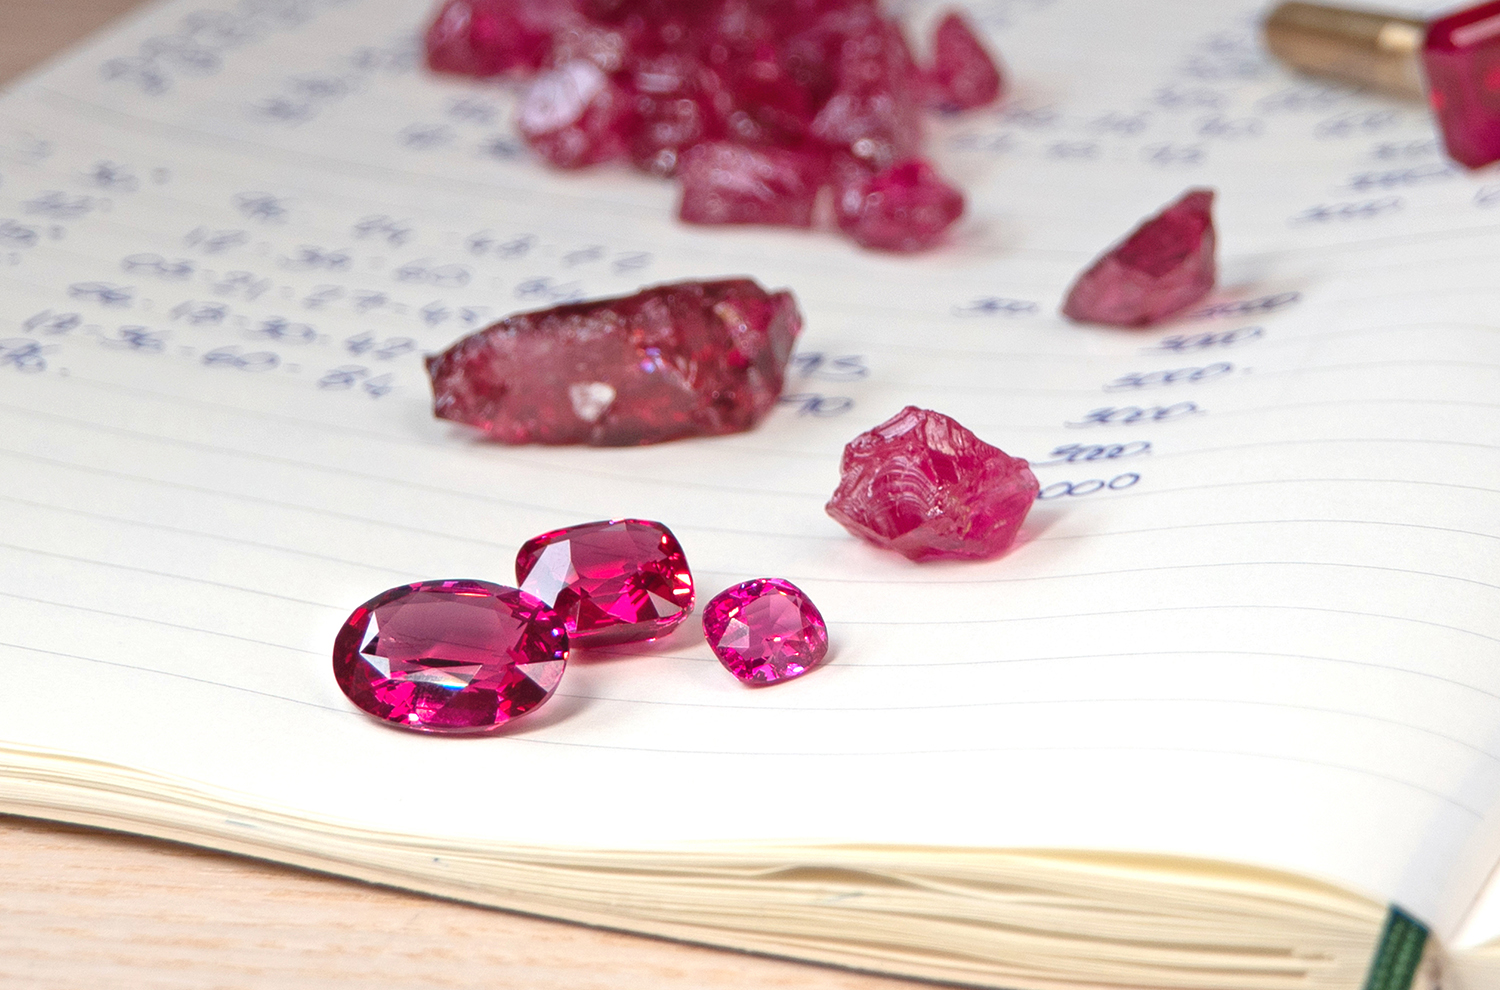 Mahenge Spinels in various gemstone cuts with their rough counterparts in the background.